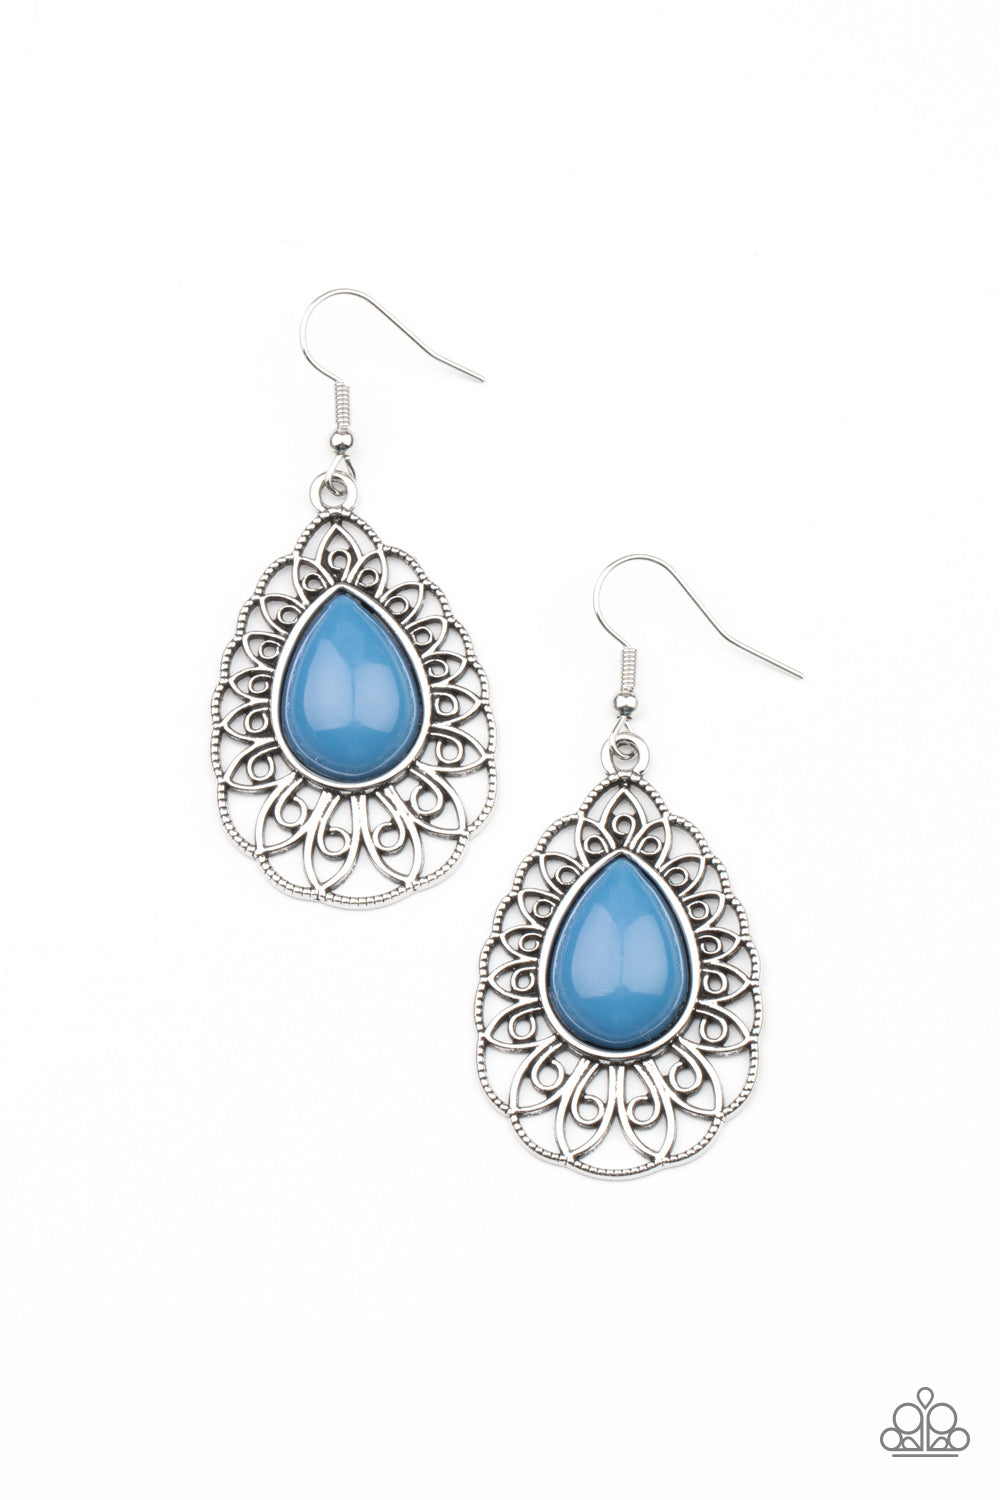 Dream STAYCATION Blue Earring - Paparazzi Accessories.  A shiny French Blue teardrop bead is pressed into the center of an airy silver teardrop frame radiating with ornate petals for a whimsical finesse. Earring attaches to a standard fishhook fitting.  ﻿All Paparazzi Accessories are lead free and nickel free!  Sold as one pair of earrings.